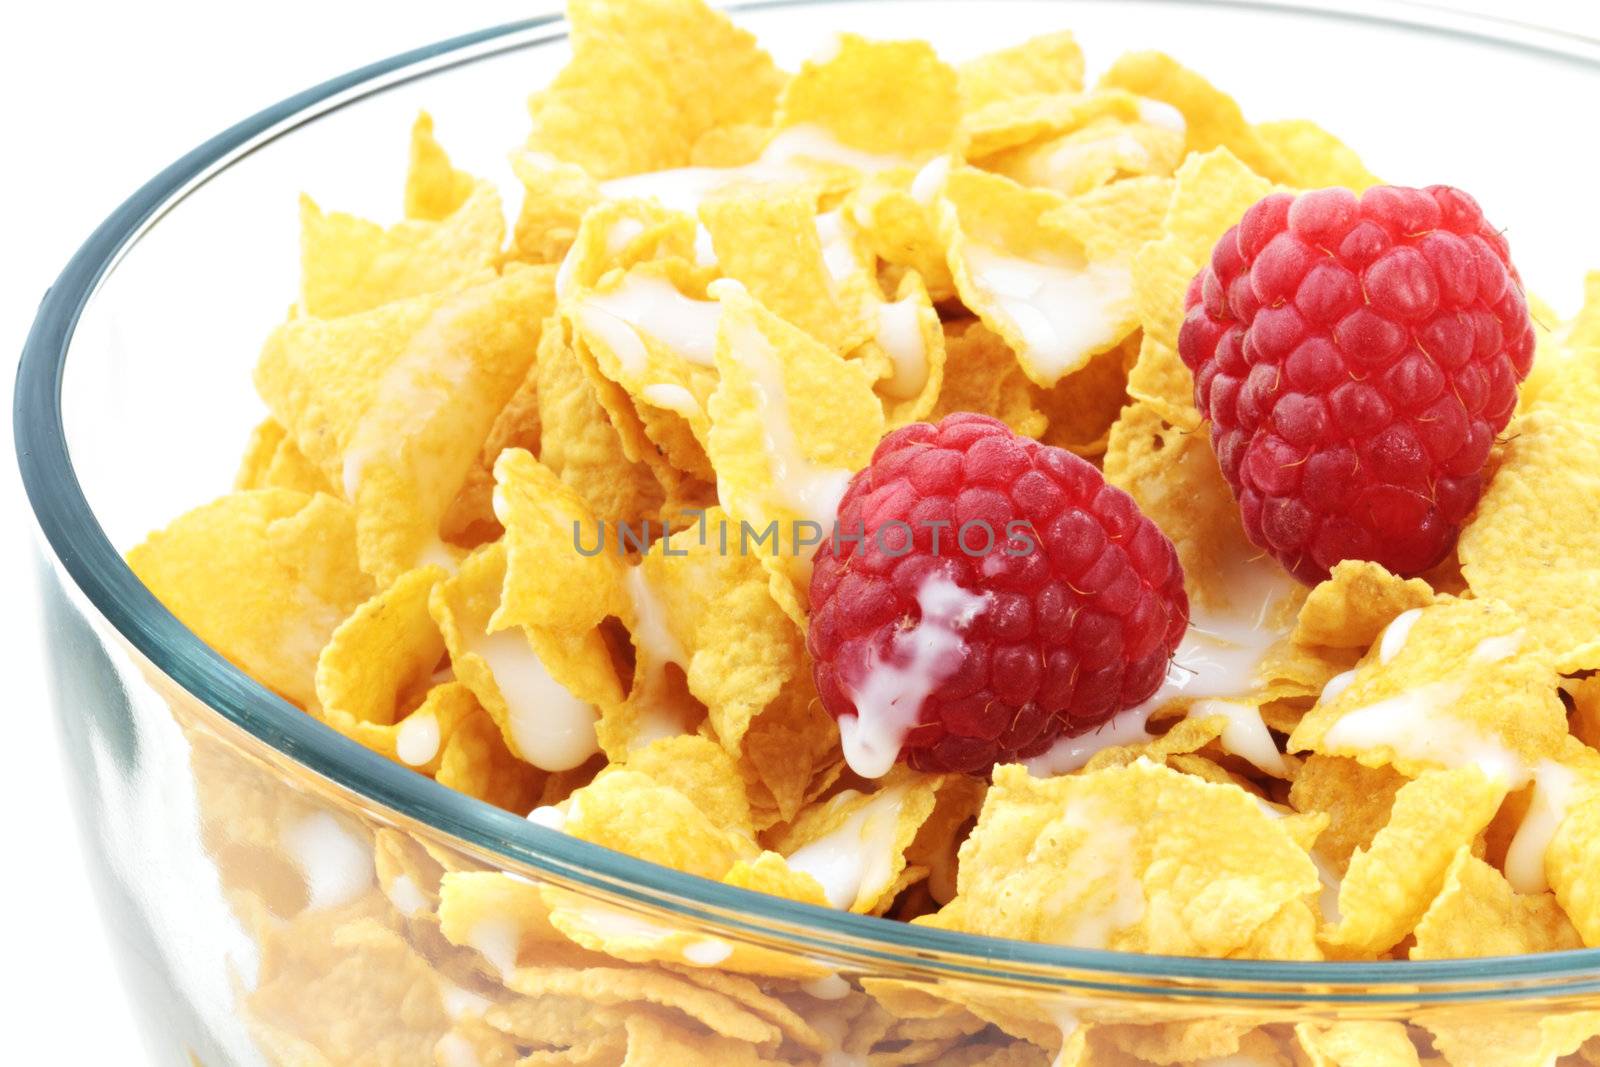 Cereal with milk and fresh raspberries in a clear bowl isolated on white.